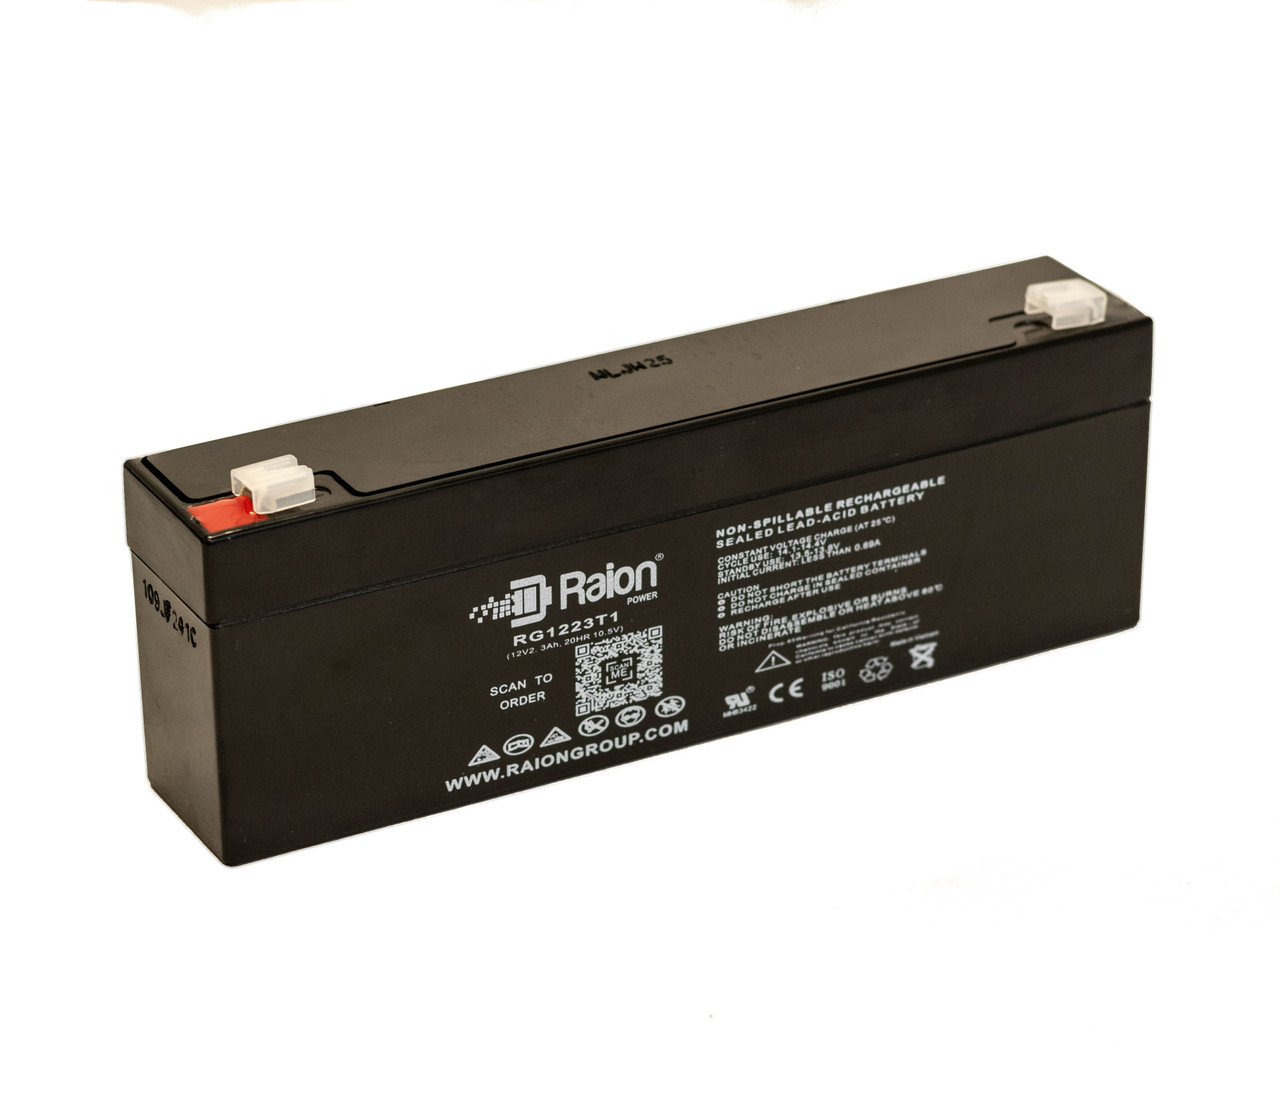 Raion Power RG1223T1 Replacement Battery for XNB SN12002.3